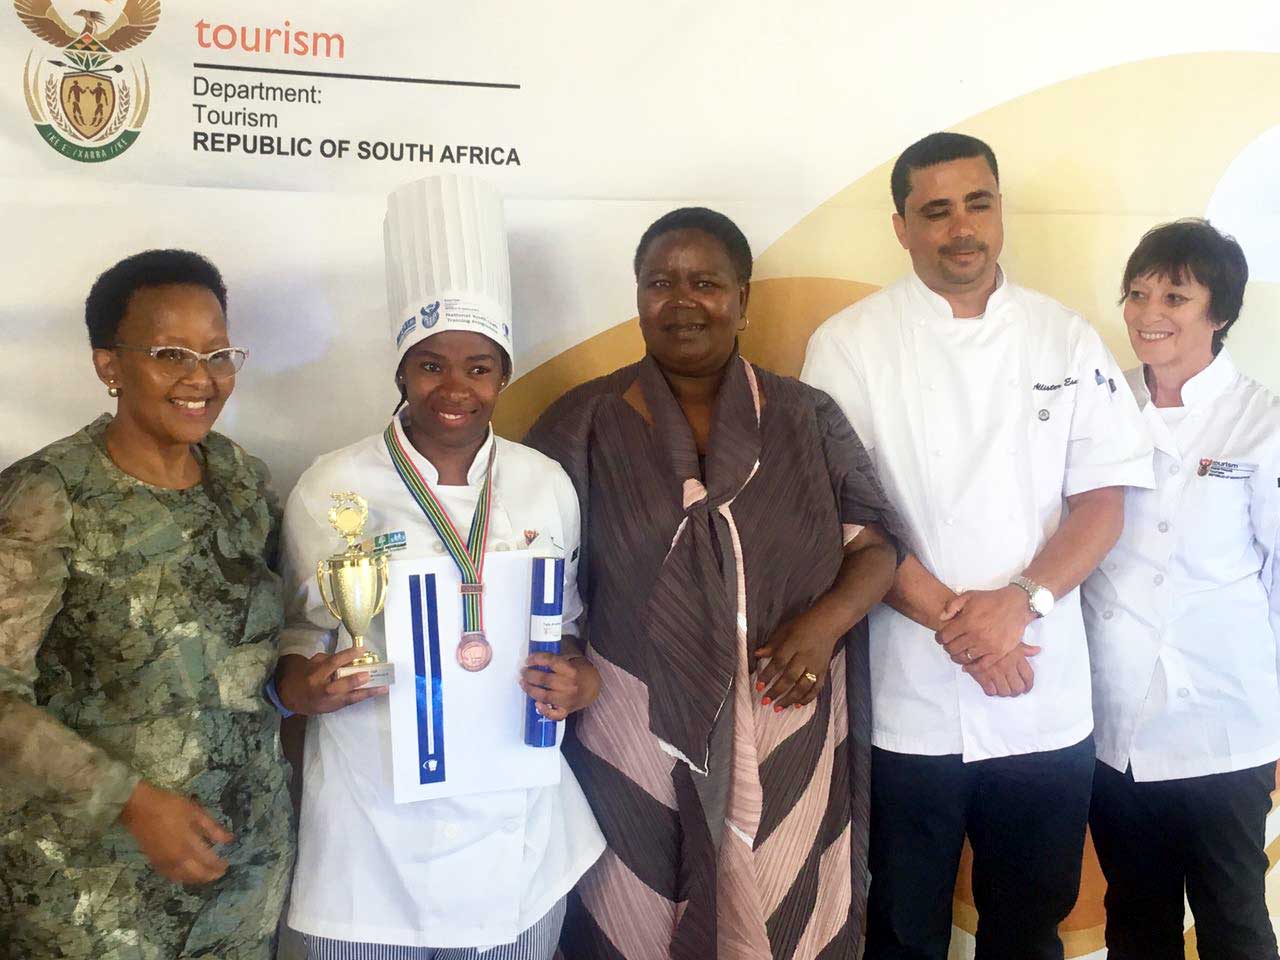 Minister Tokozile Xasa attends the Eastern Cape graduation of the National Youth Chef Training Programme